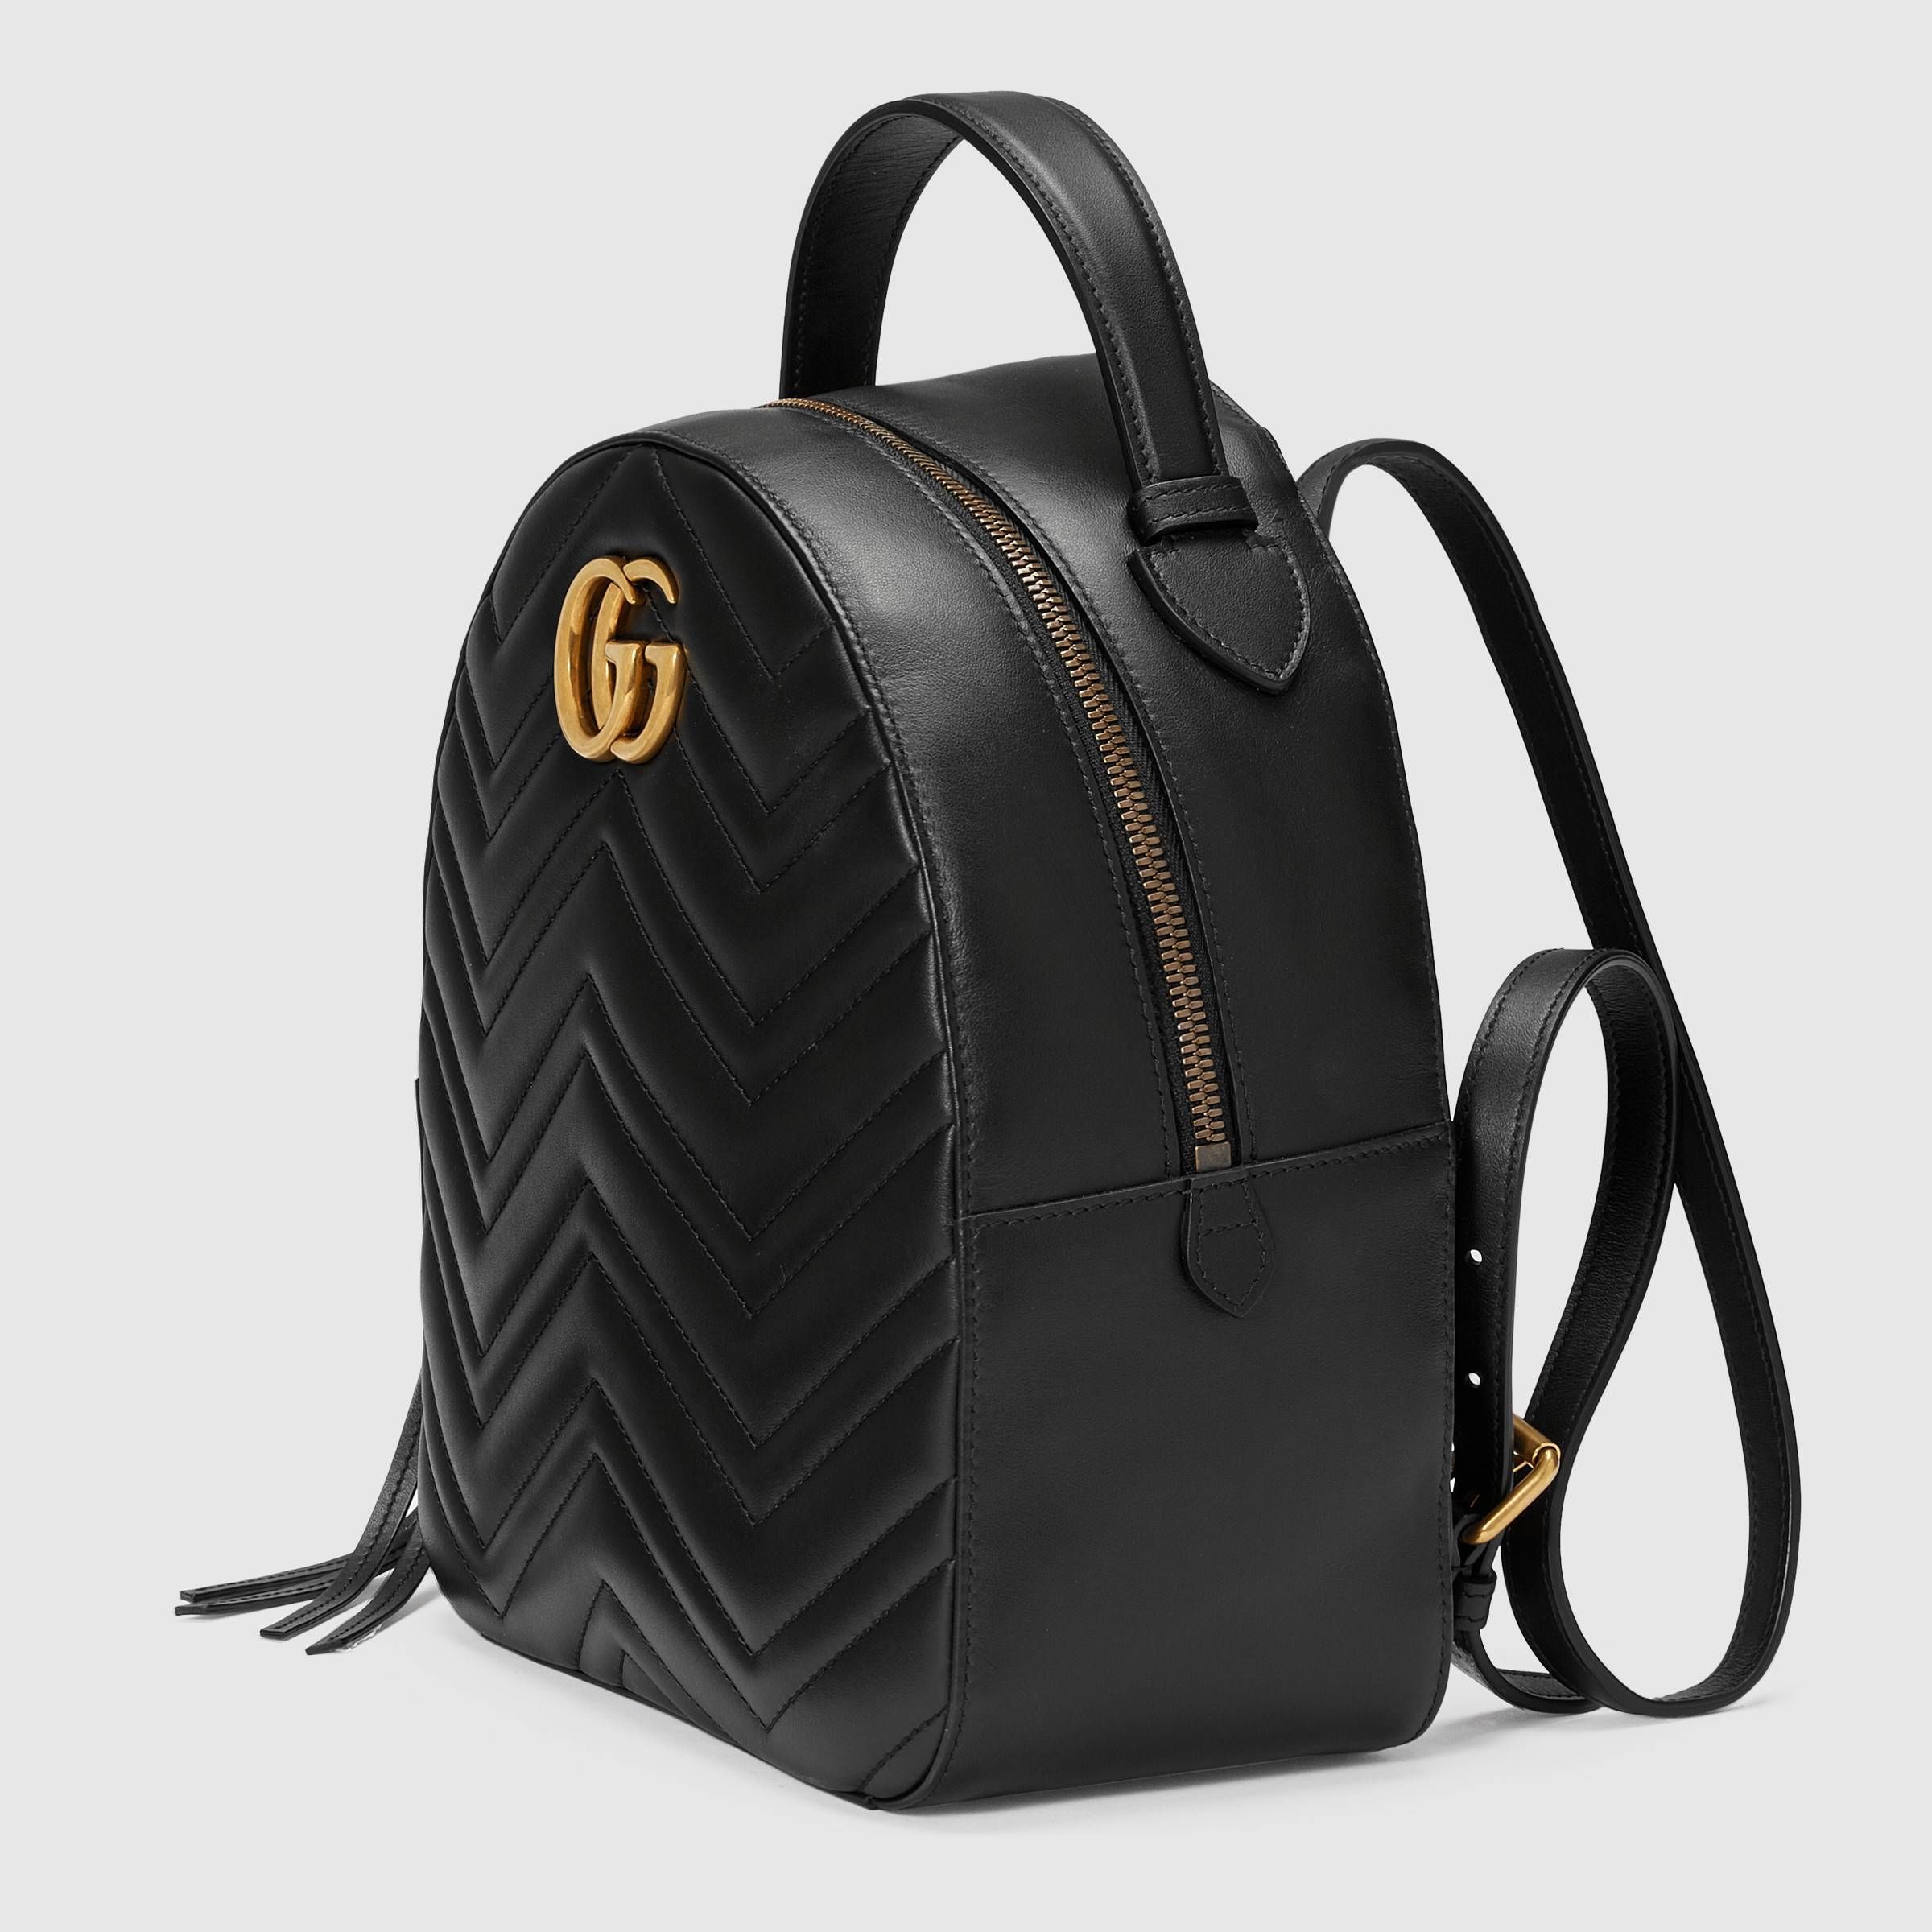 BALO NỮ GUCCI MARMONT BACKPACK 21